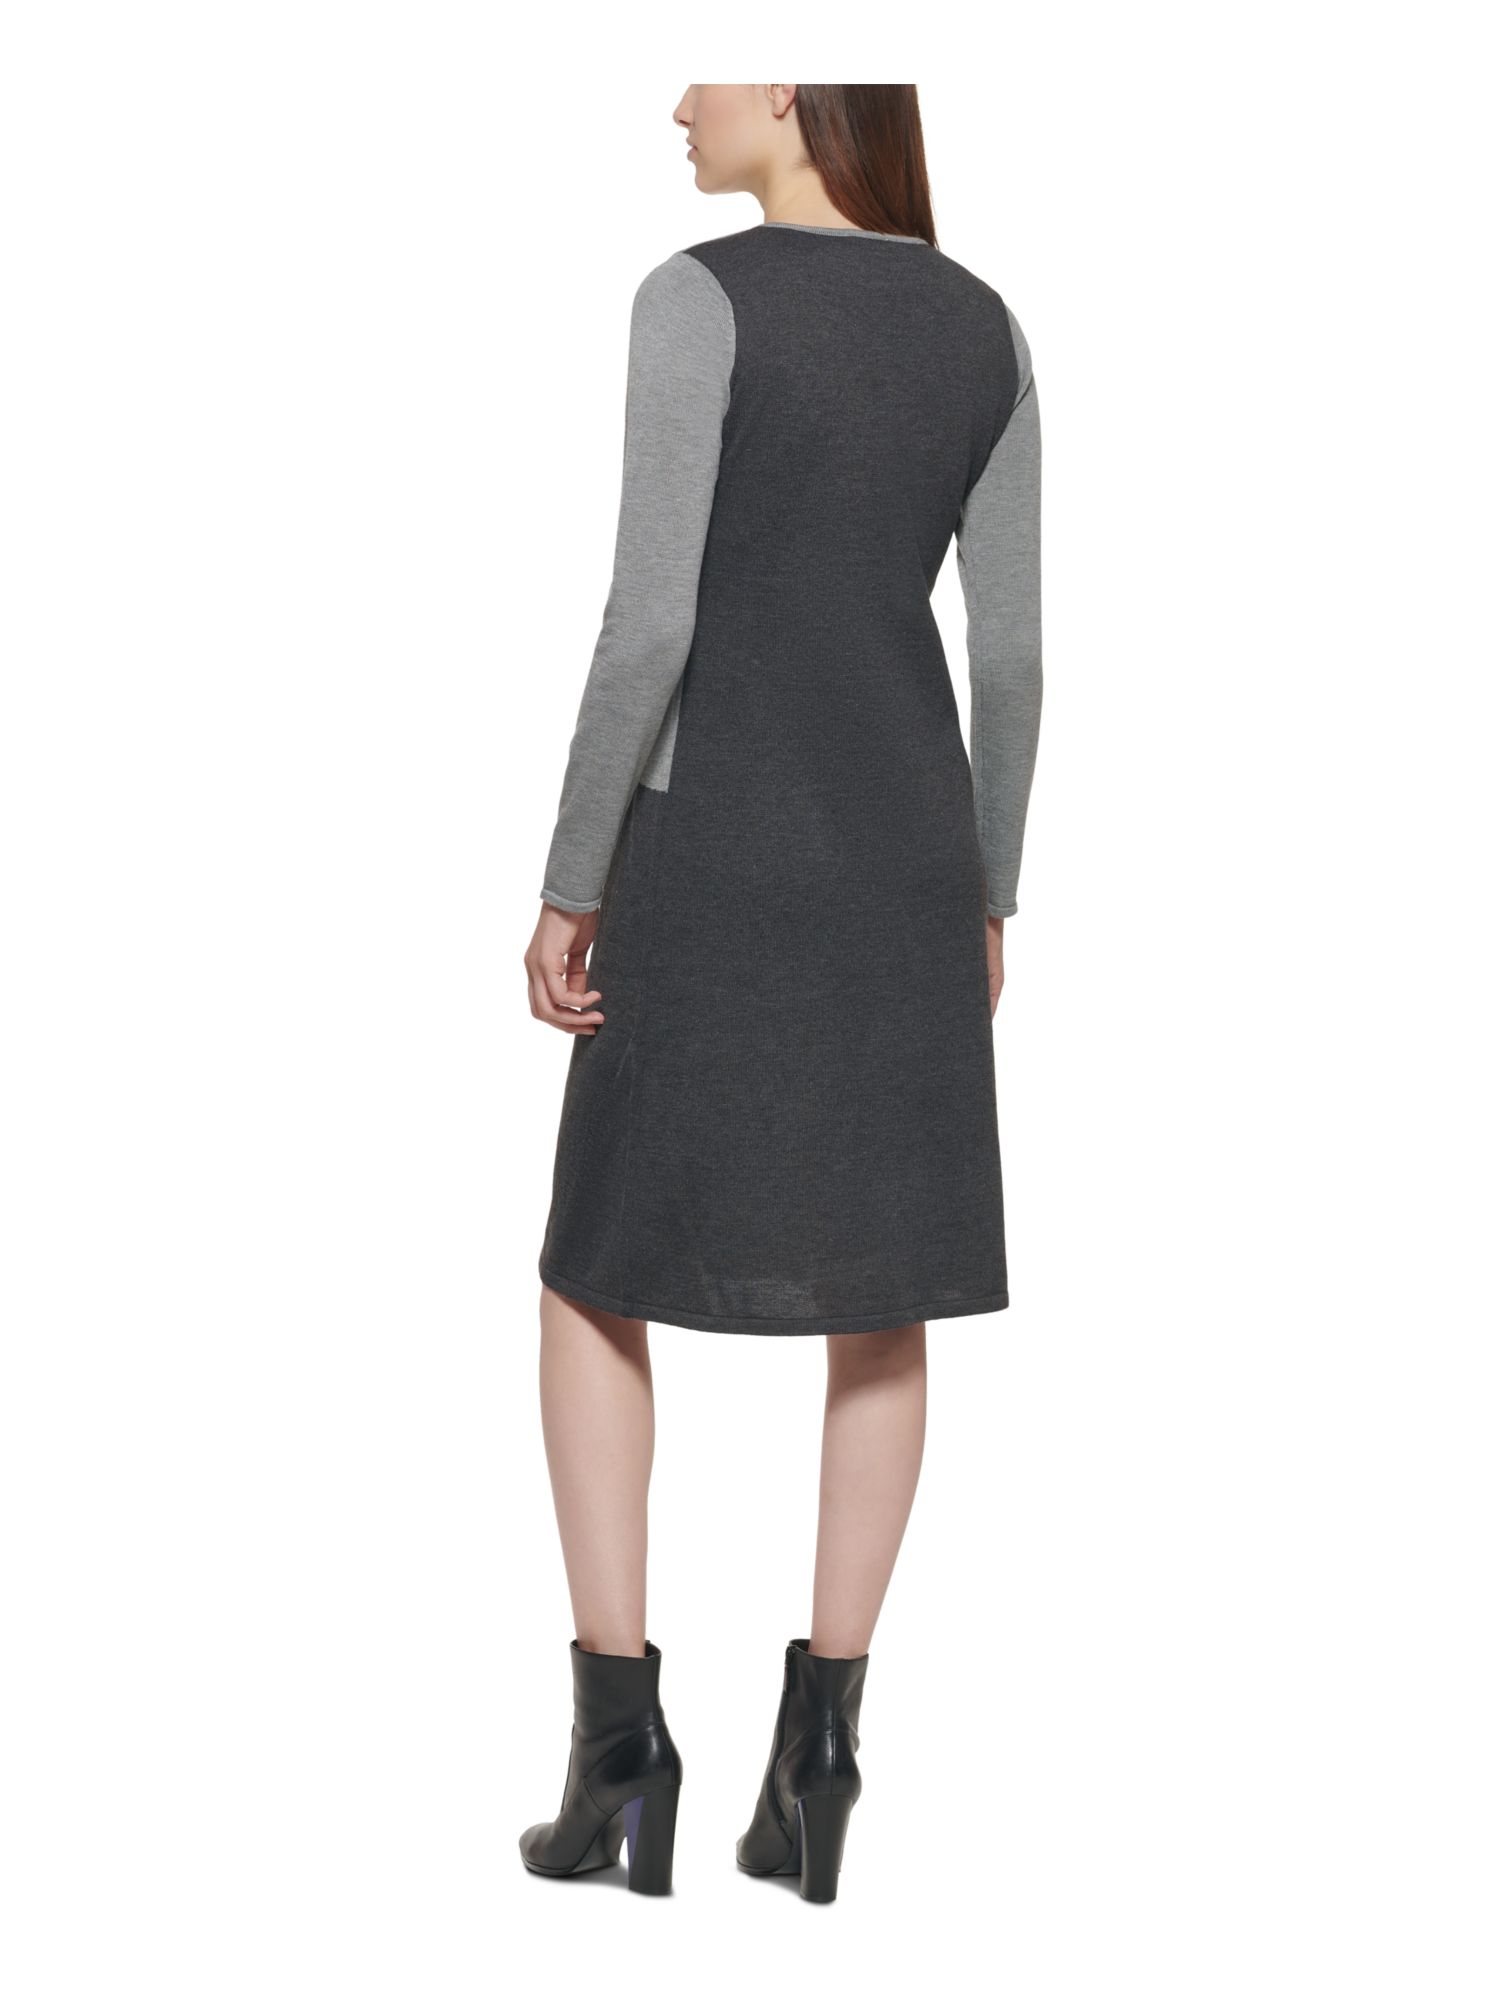 Calvin Klein CALVIN KLEIN Womens Gray Knit Fitted Color Block Long Sleeve  Round Neck Knee Length Party Sweater Dress S